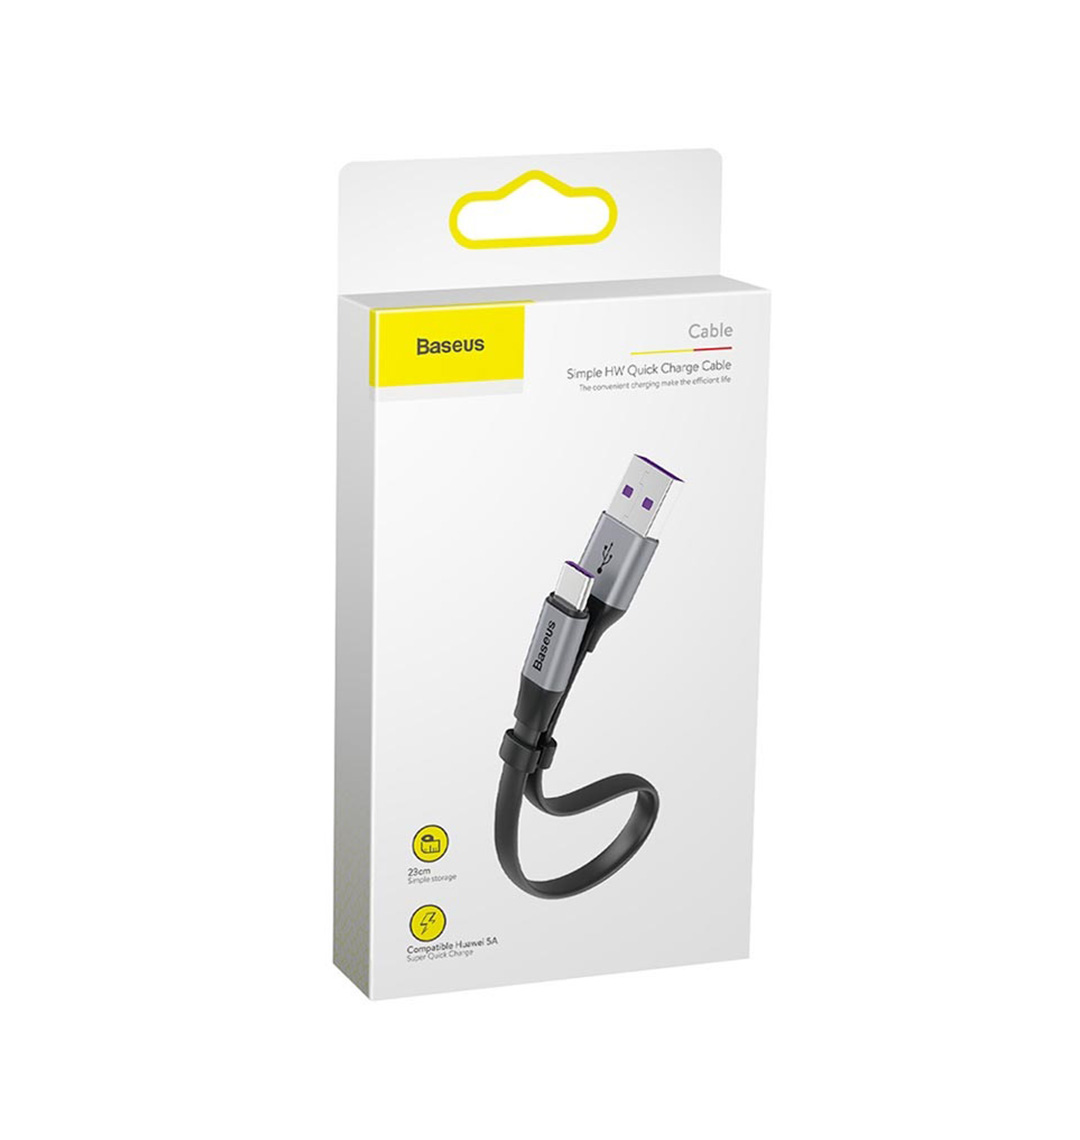 Baseus Simple HW Charge Cable in Sri Lanka